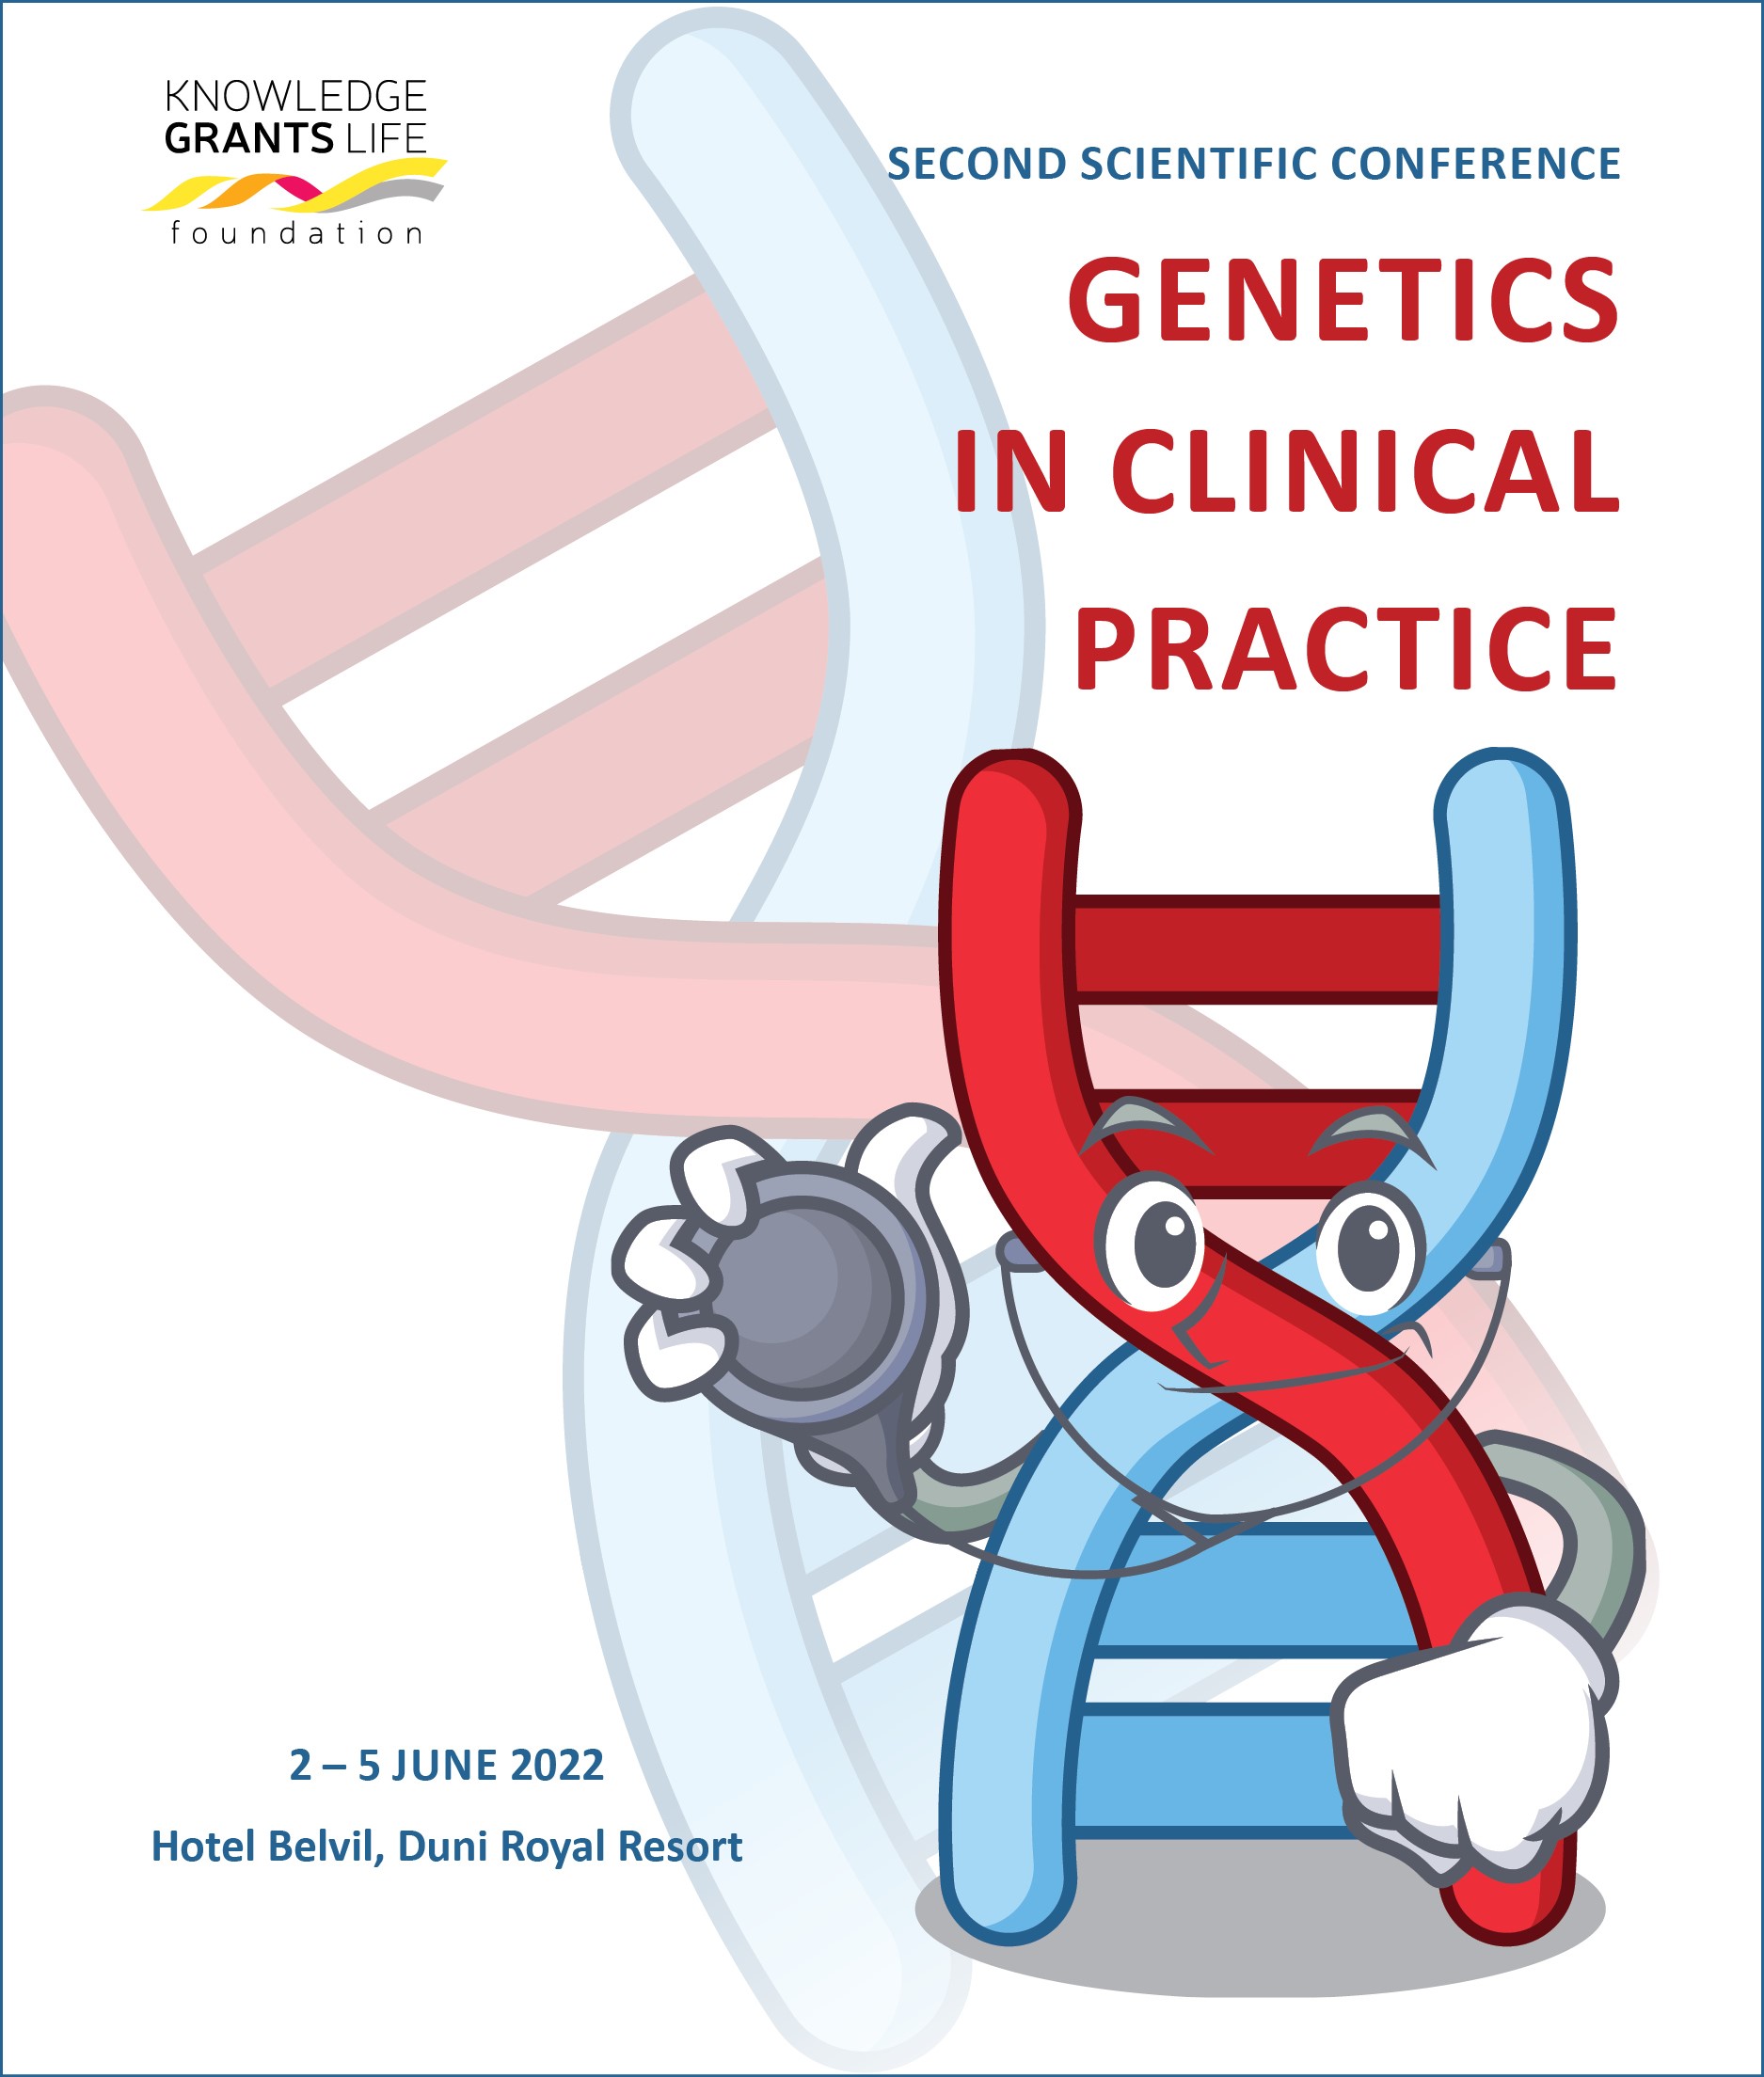 Second Scientific Conference "Genetics in clinical practice"